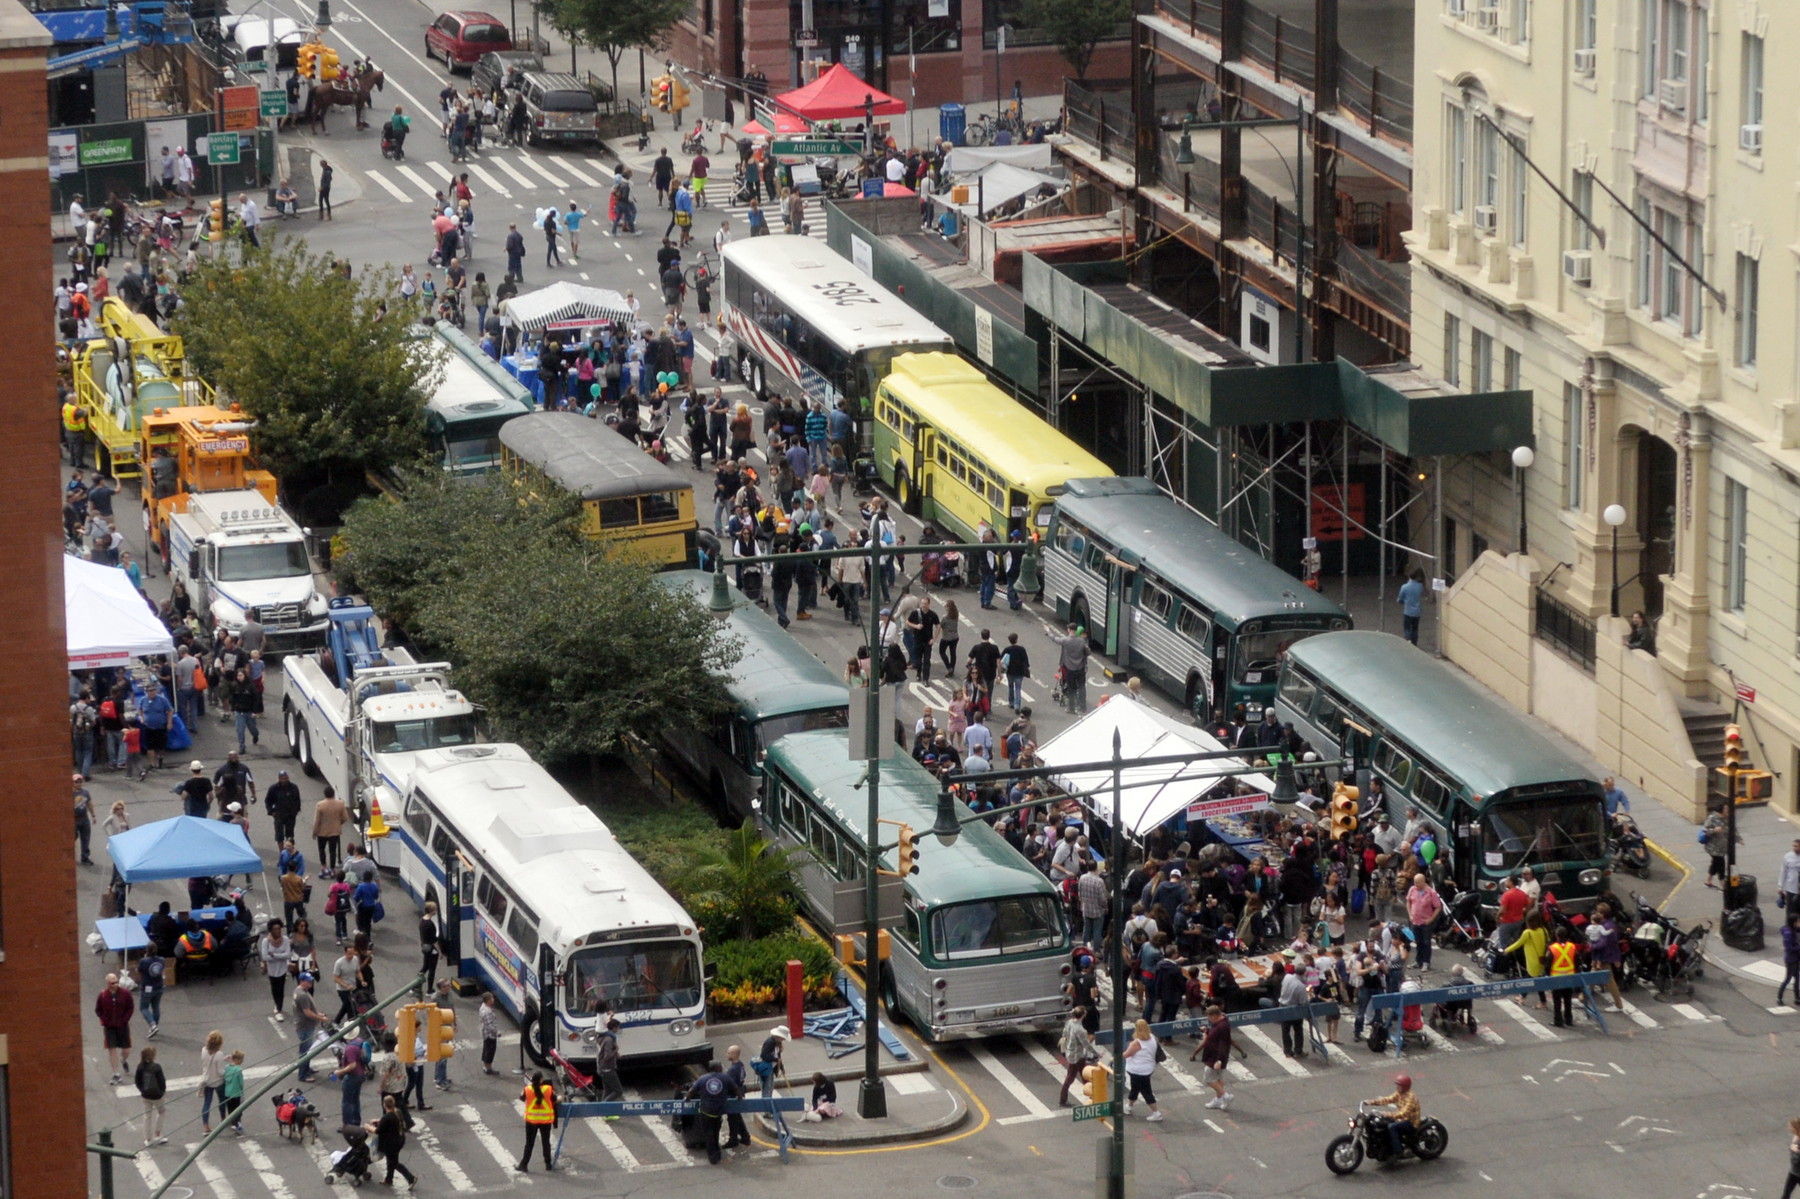 24th Annual Bus Festival At New York Transit Museum